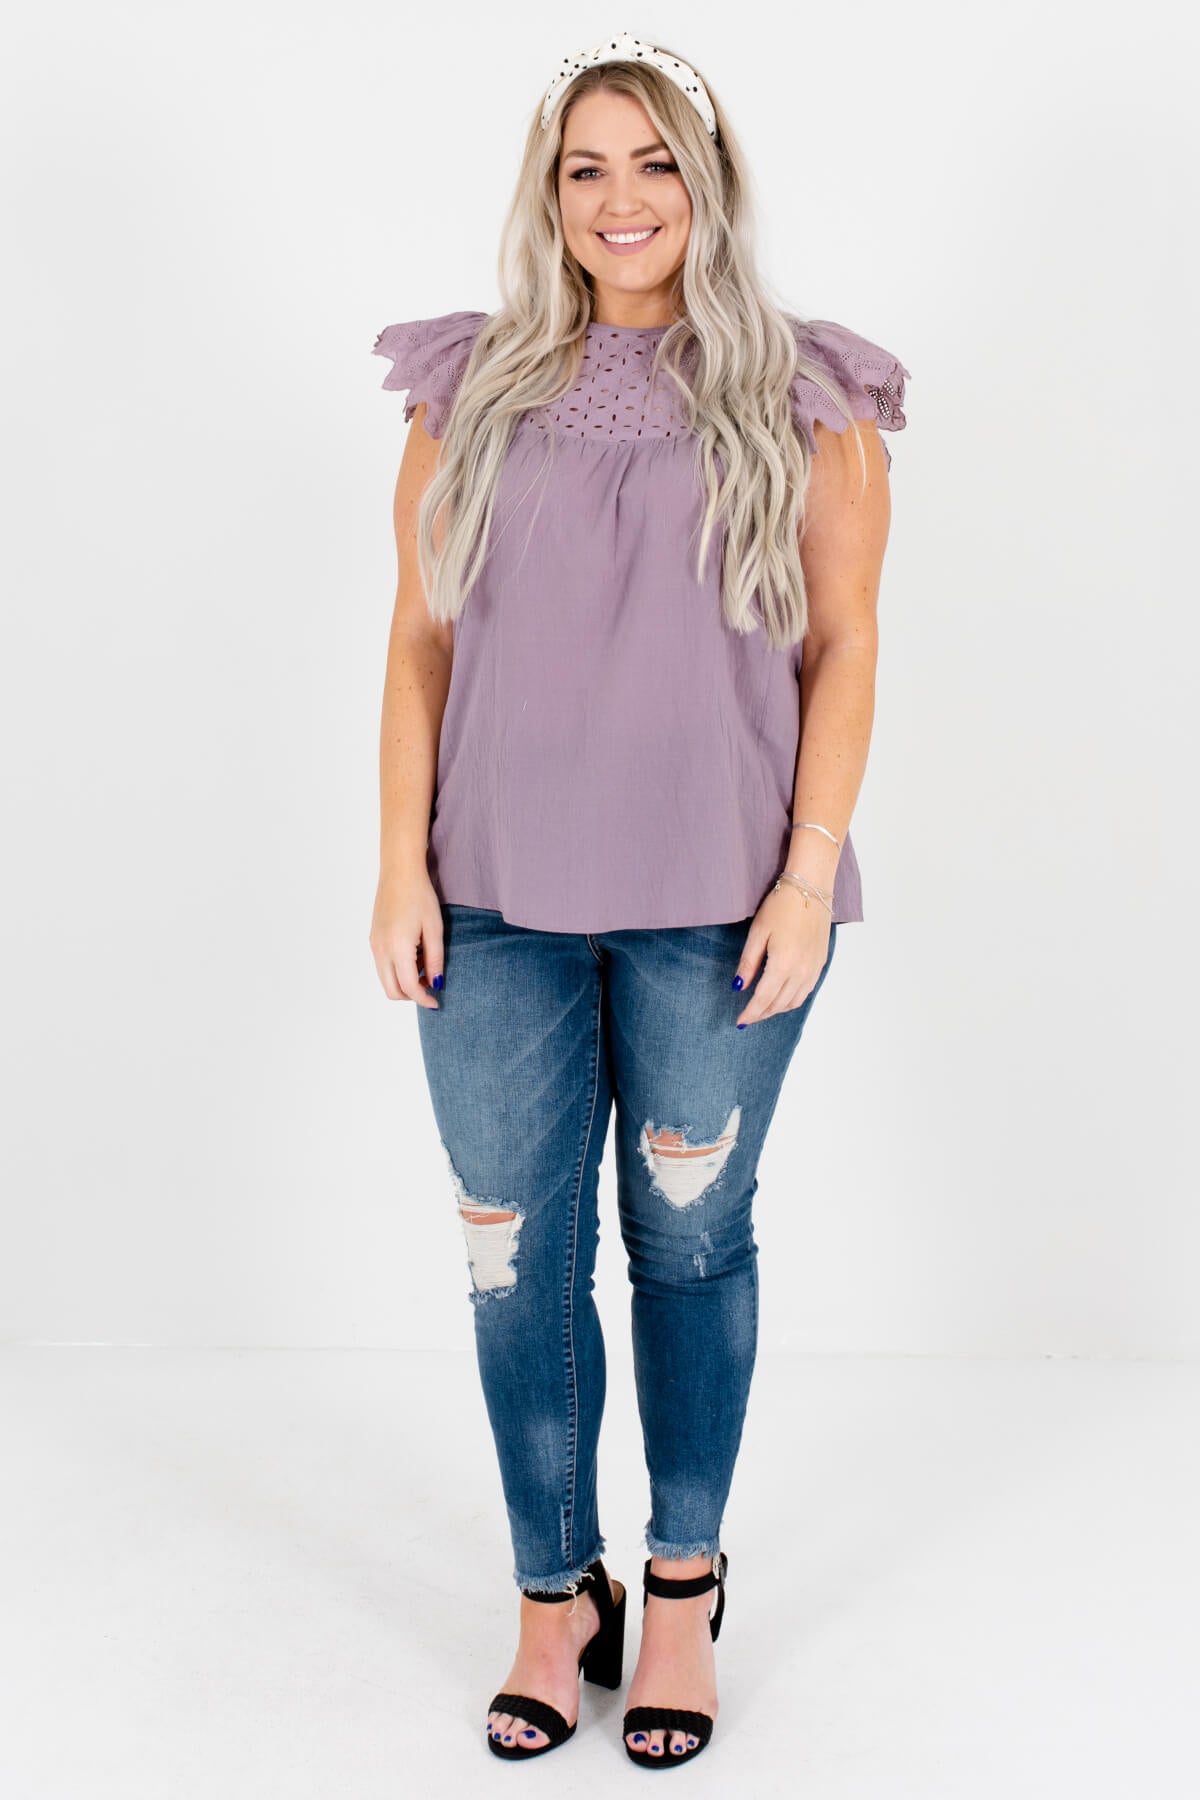 Women's Lavender Purple Spring and Summertime Plus Size Boutique Clothing